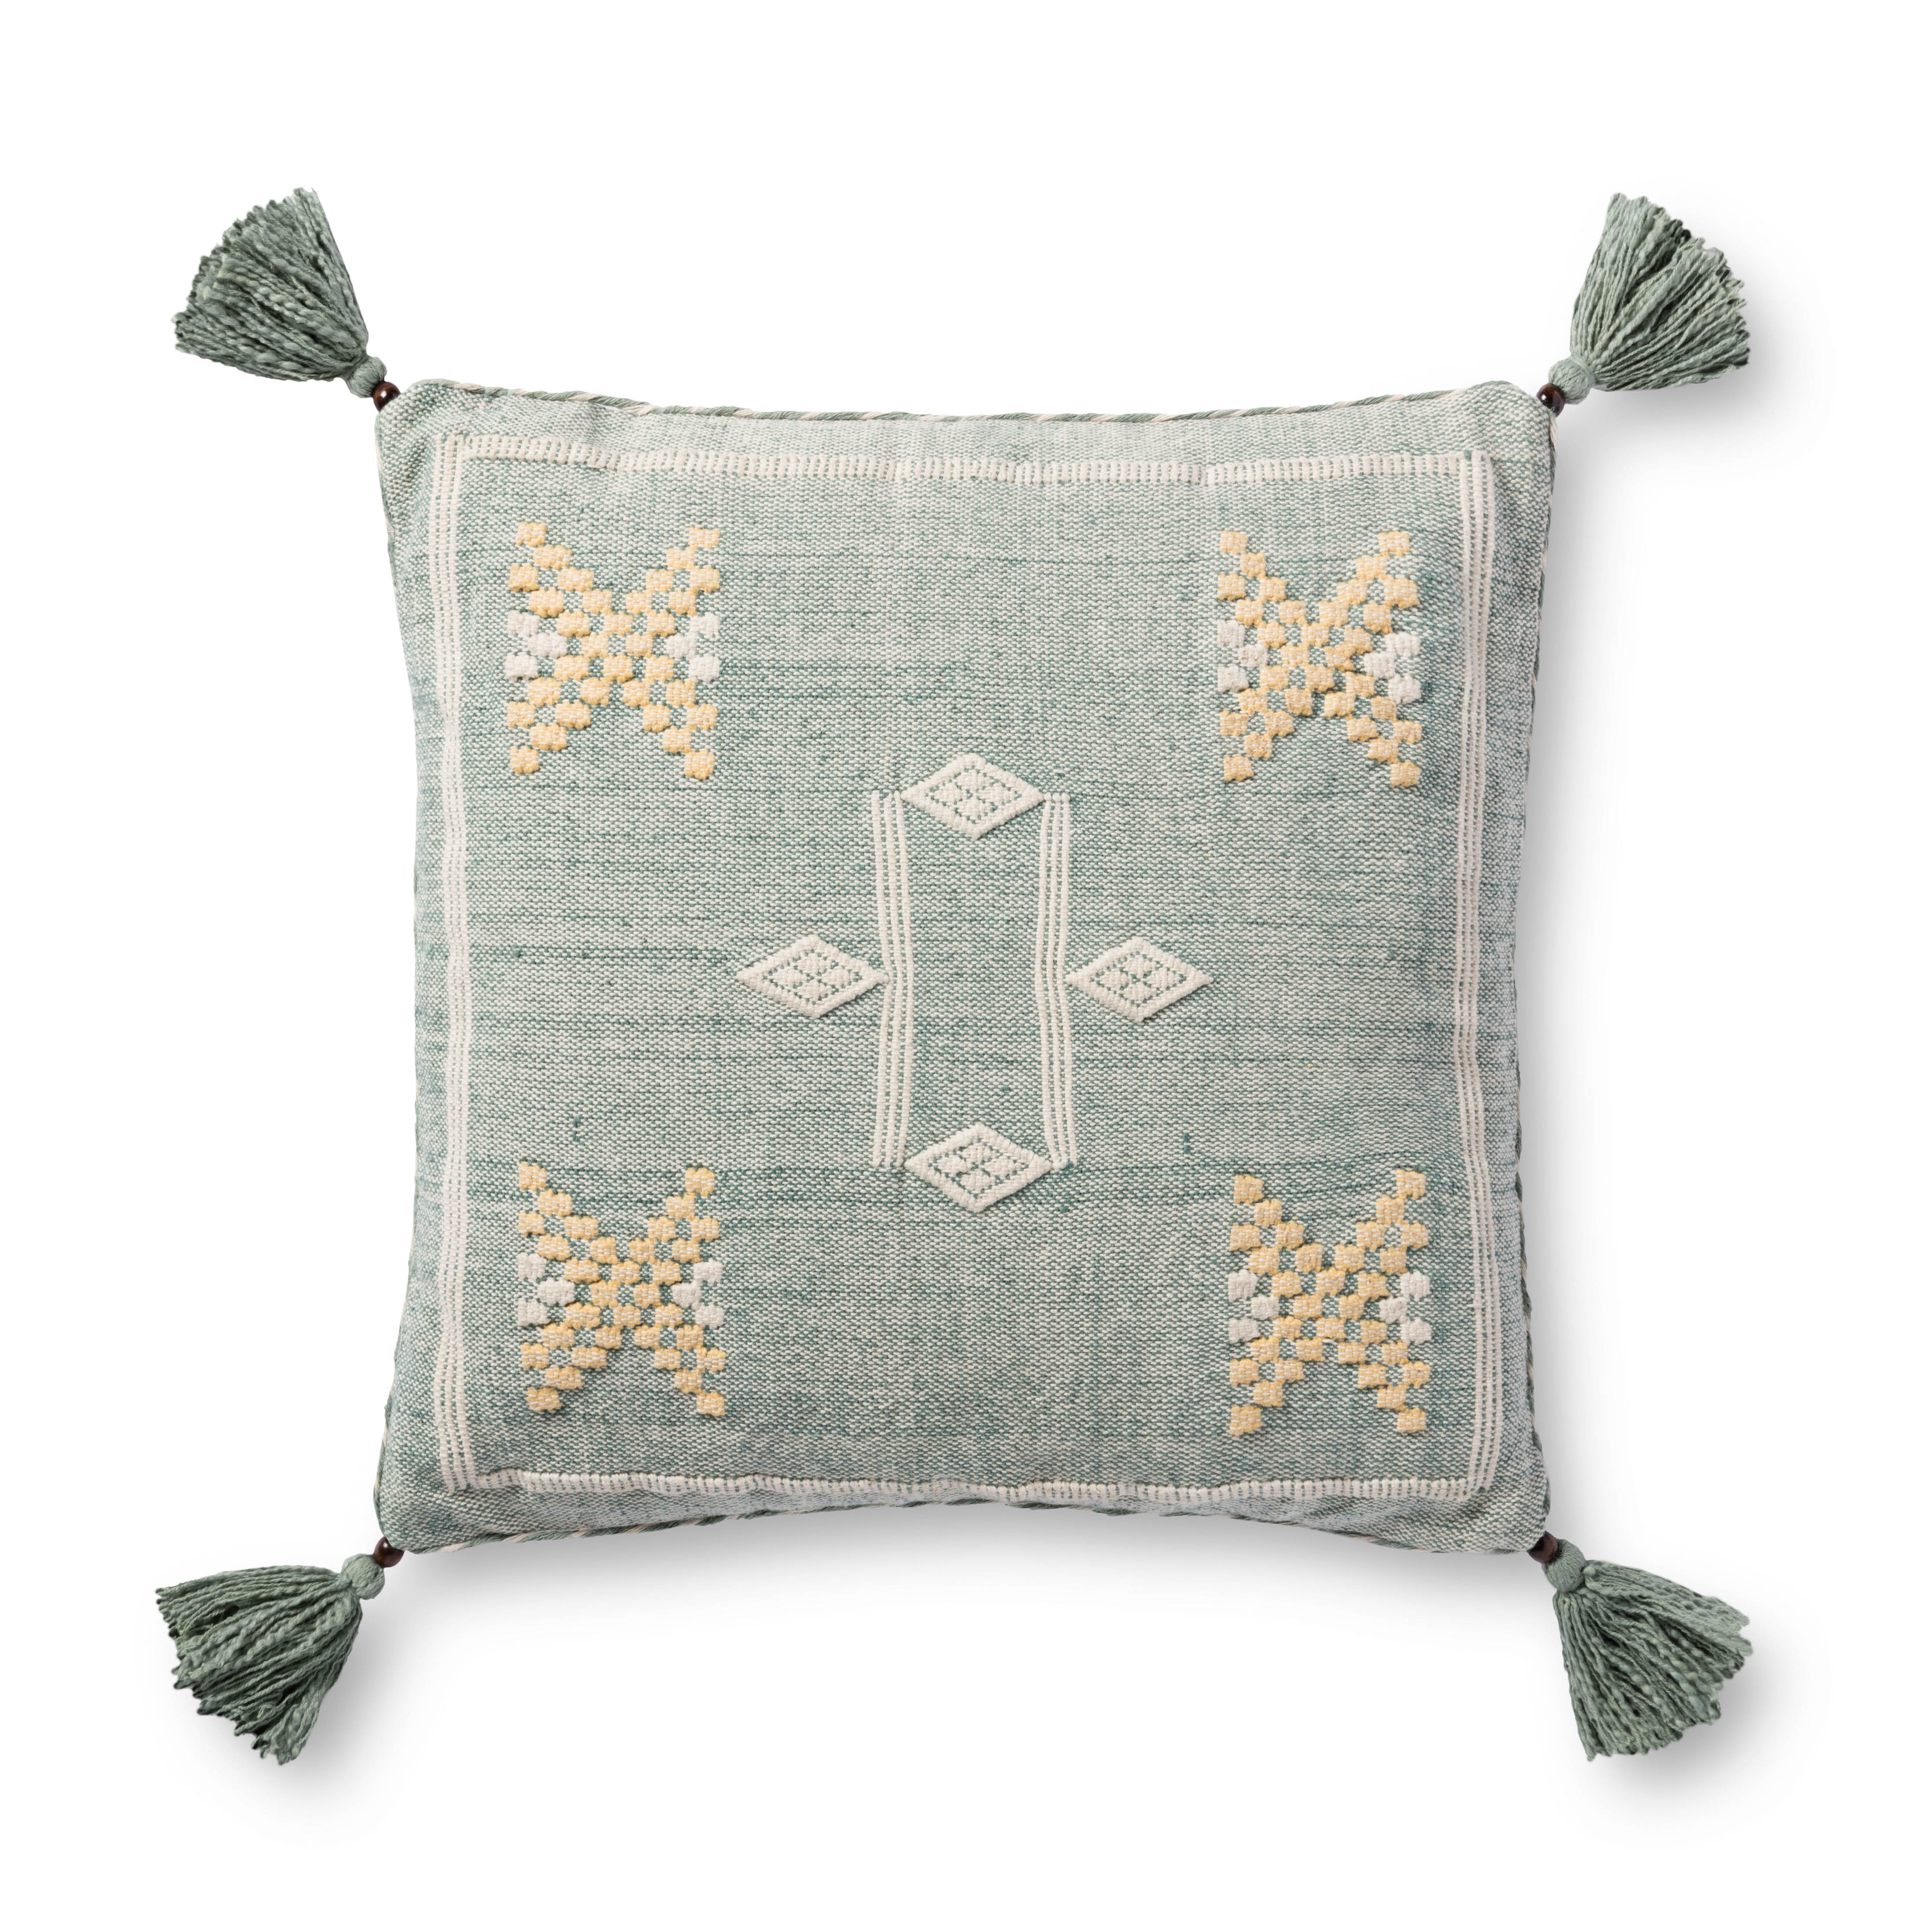 PILLOWS P4145 GREEN / MULTI 18" x 18" Cover w/Down - ED Ellen DeGeneres Crafted by Loloi Rugs